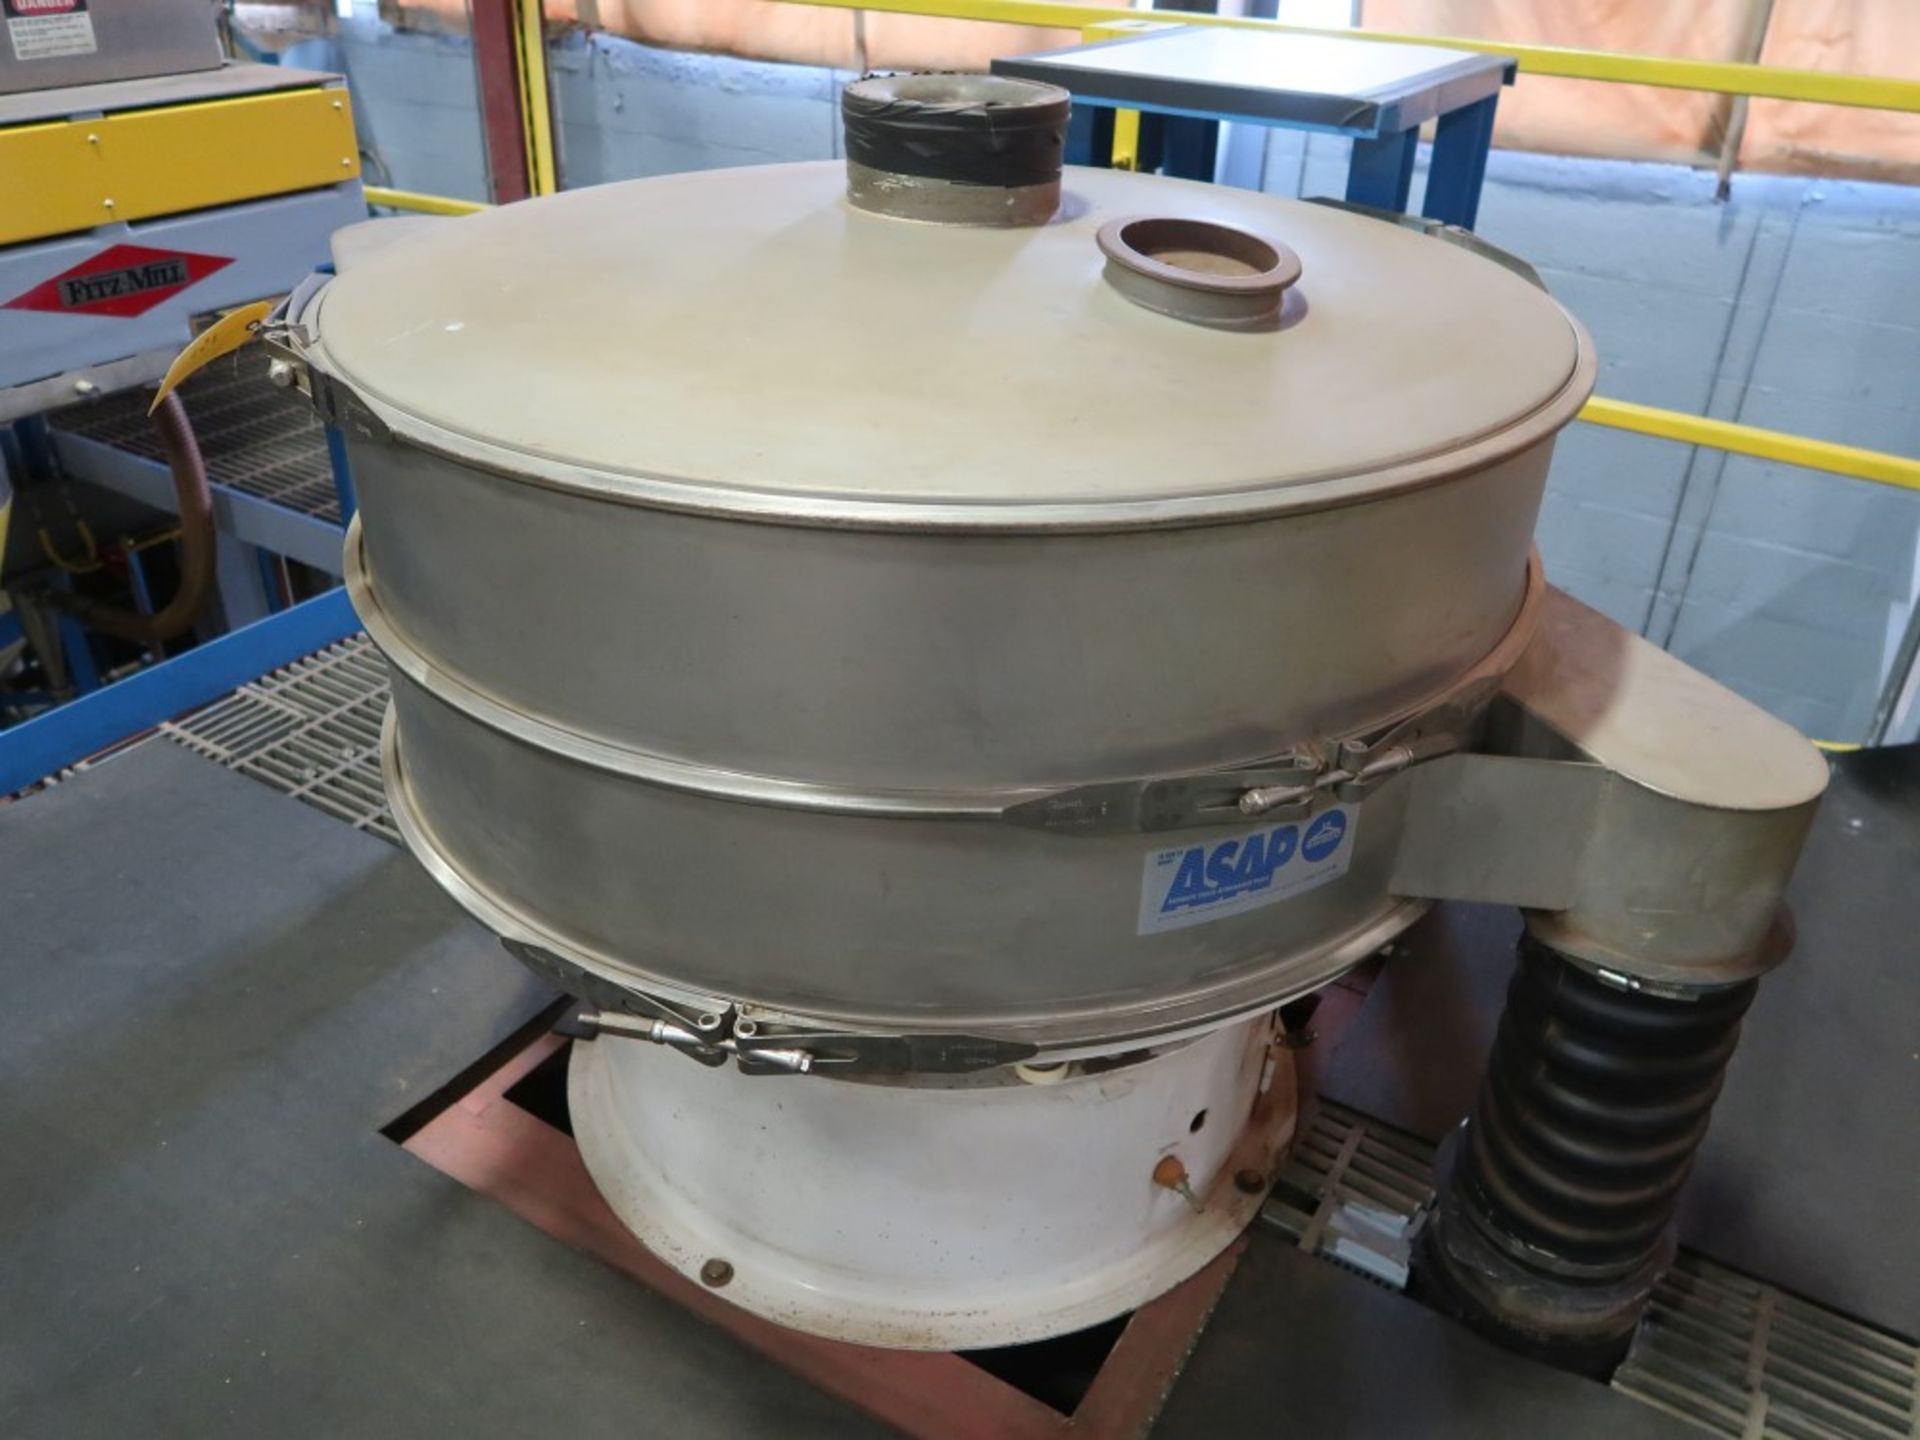 Sweco Vibro Energy Seperator 48" Vibratory Screener Model XS48S88 S/N 644158-A1096, Stainless, 2. - Image 3 of 5